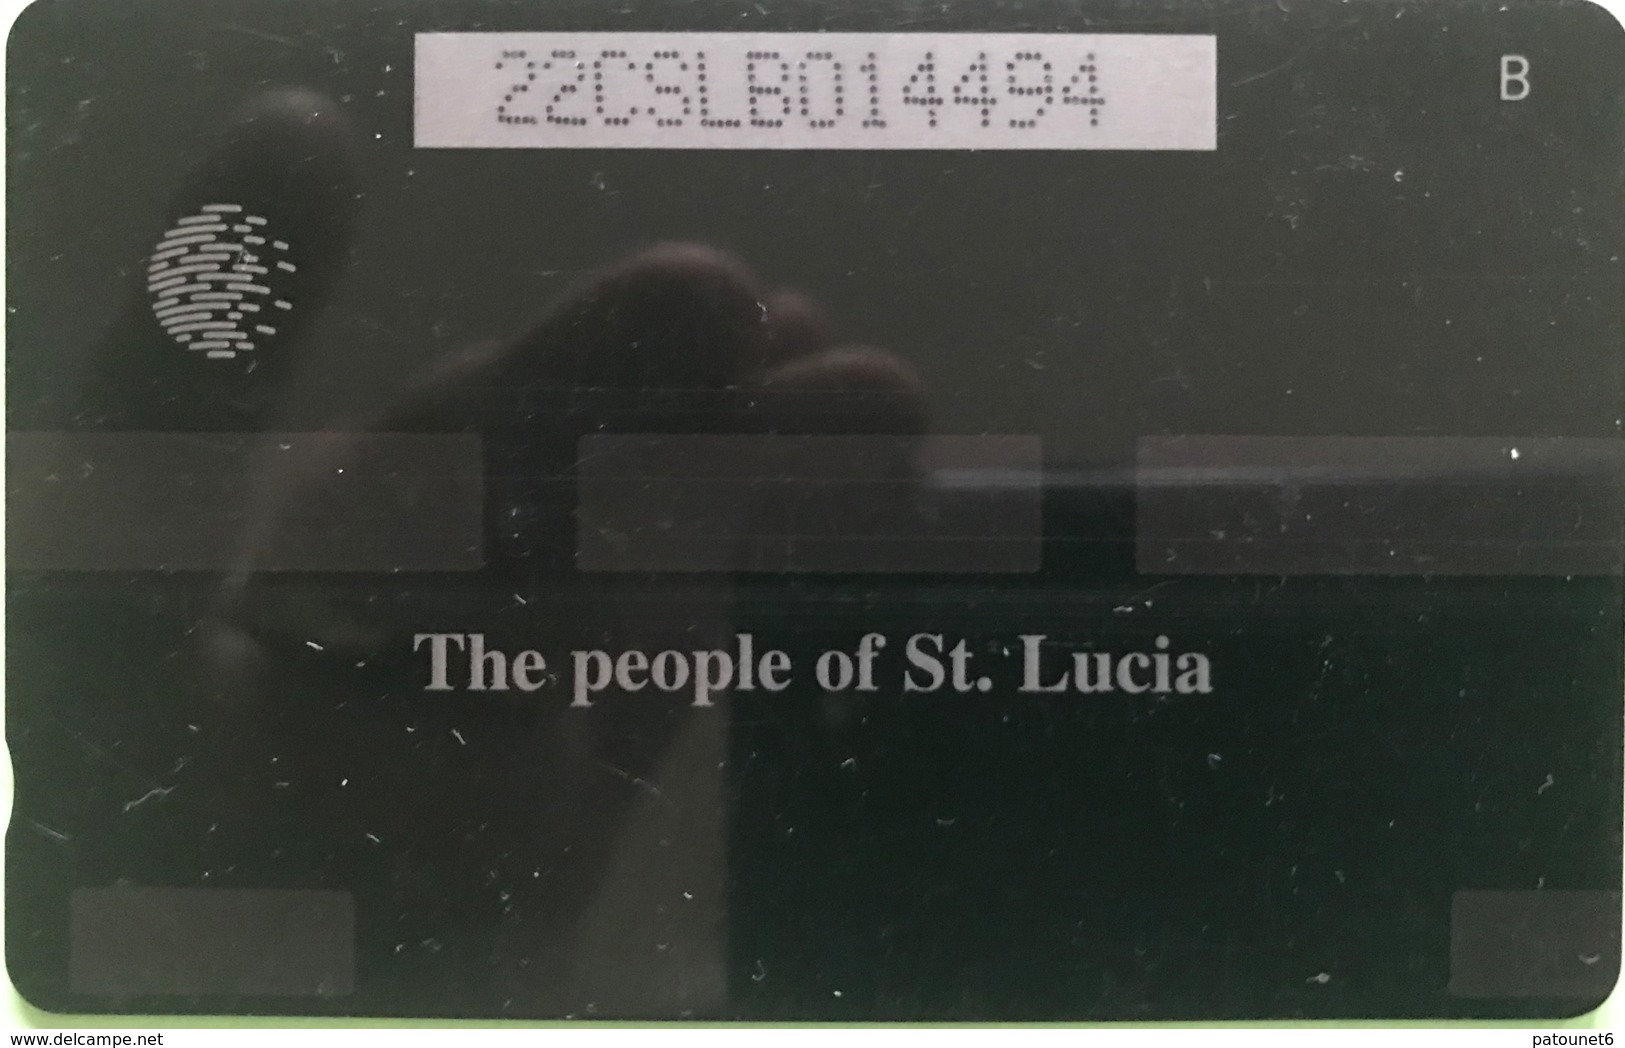 SAINTE LUCIE  -  Phonecard  - Cable & Wireless   - The People Of St. Lucia  -  EC $ 20 - Saint Lucia